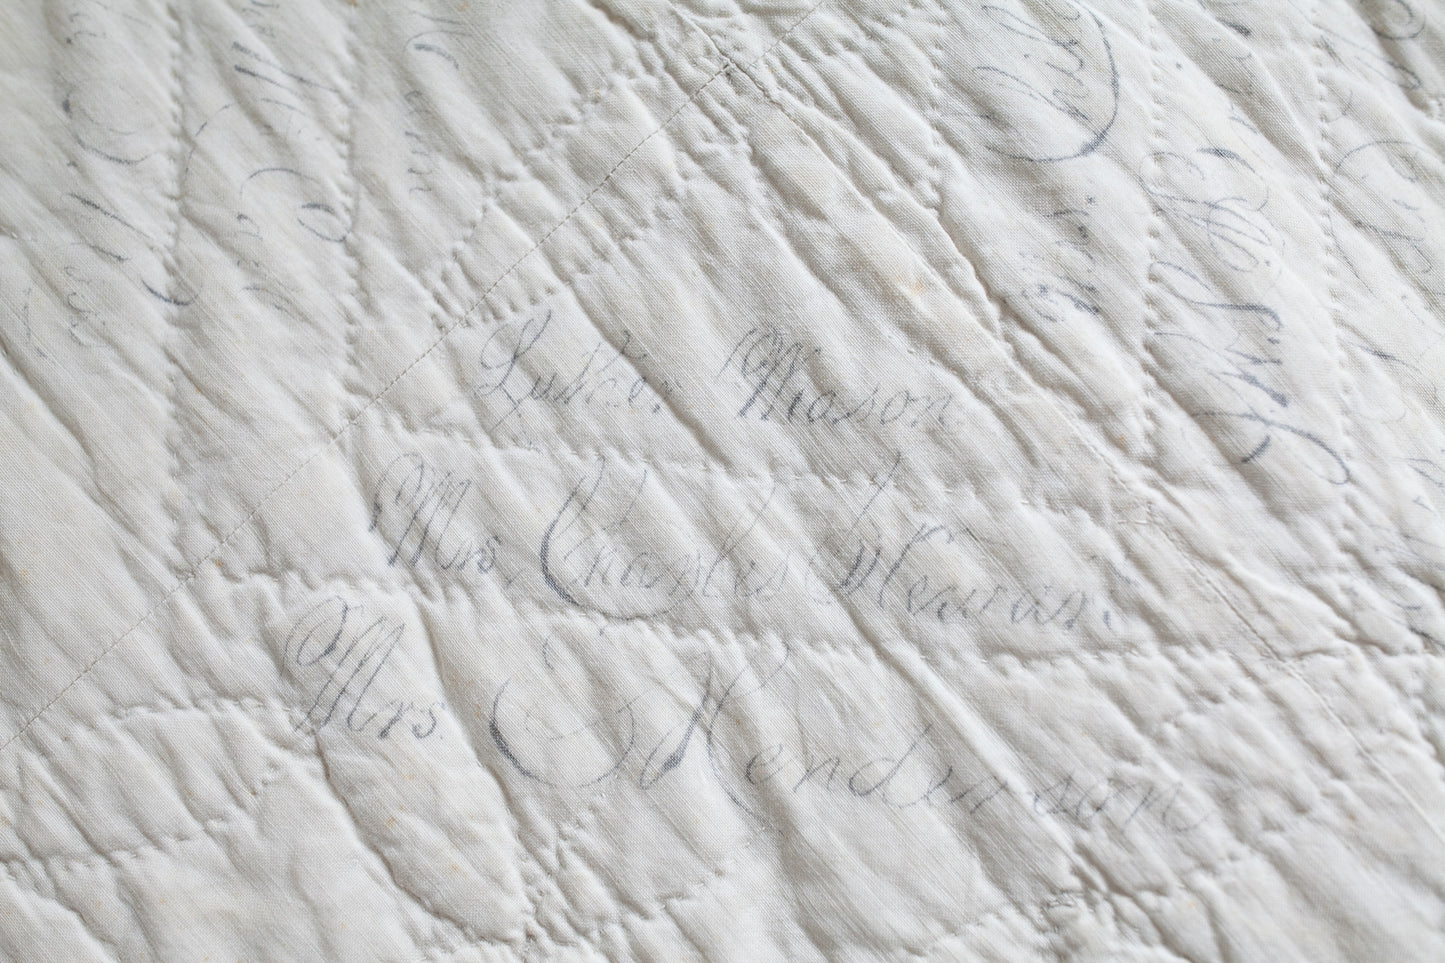 Antique Autographed Red and White Quilt - Antique Quilt- Embroidered